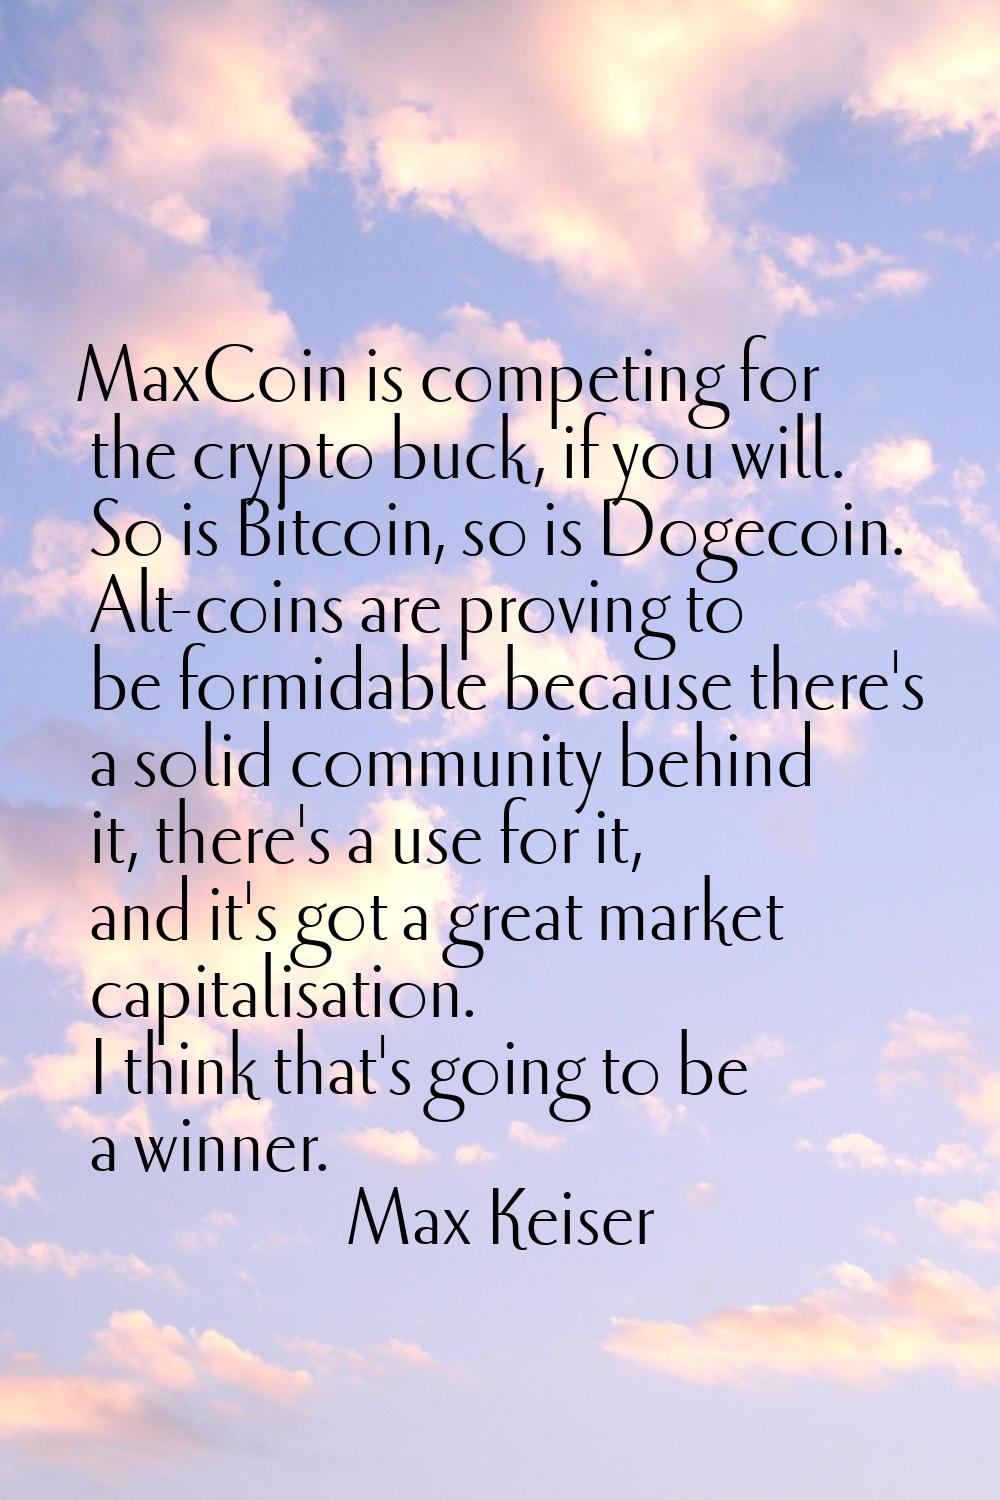 MaxCoin is competing for the crypto buck, if you will. So is Bitcoin, so is Dogecoin. Alt-coins are